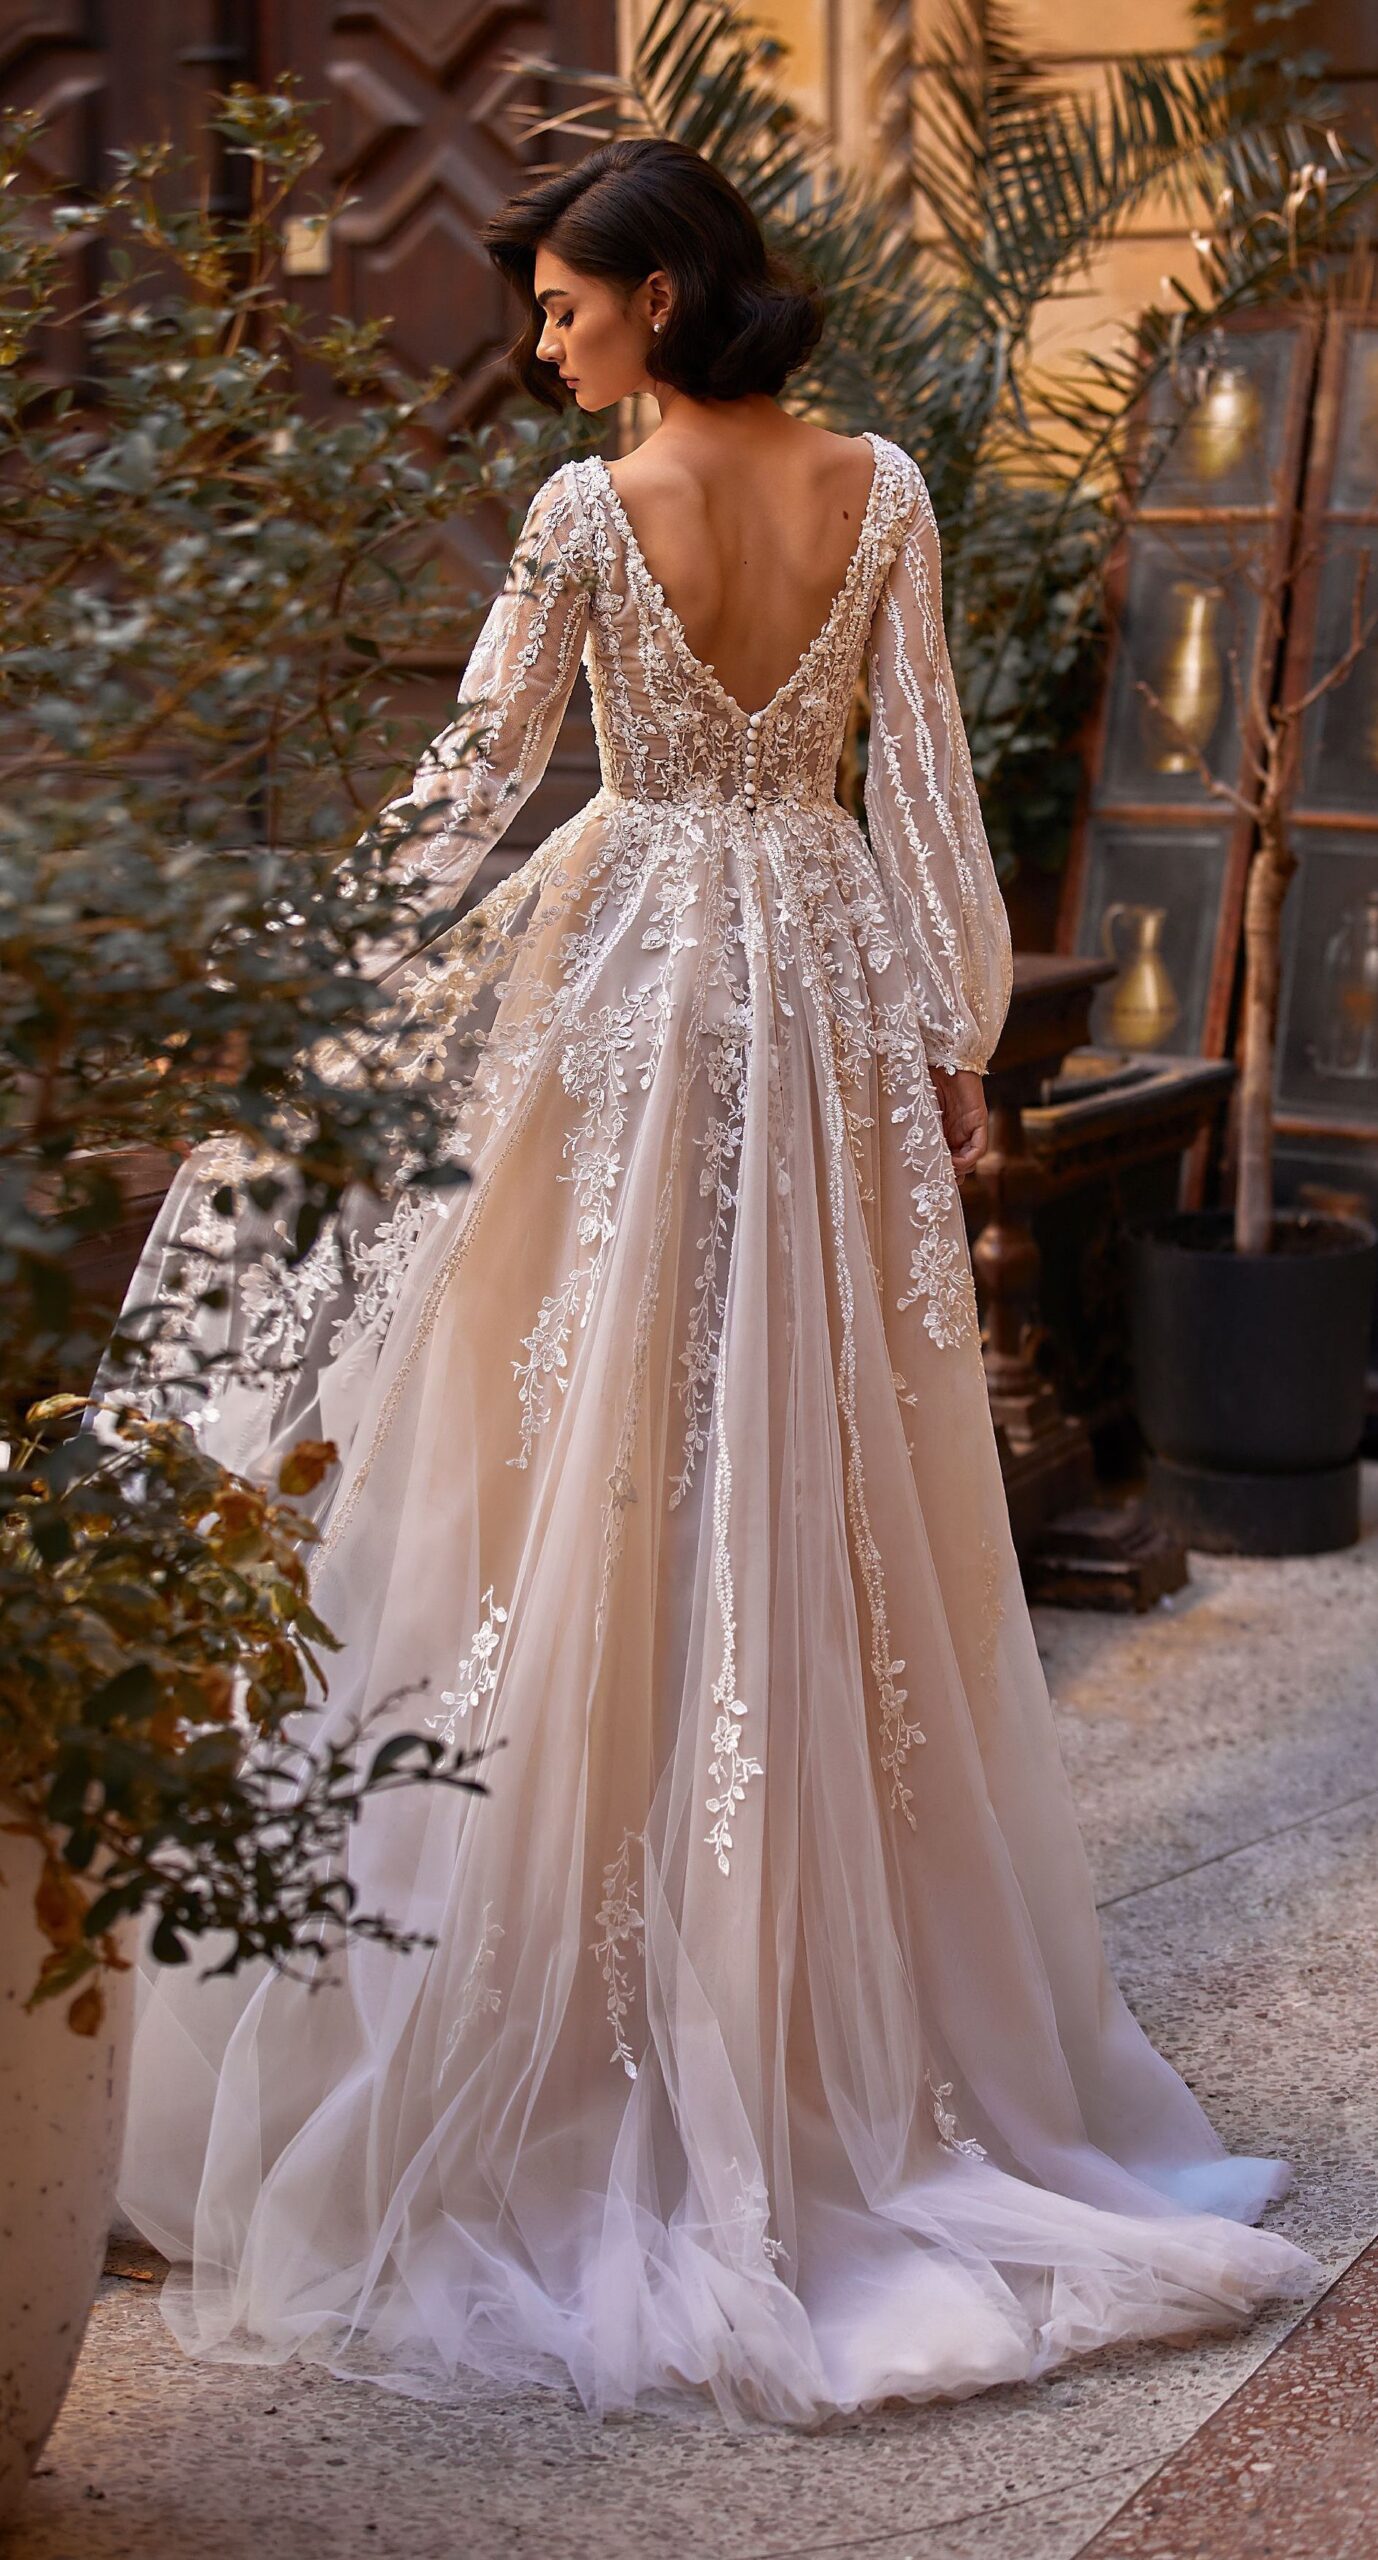 Wedding Dresses With Sleeves: Better Than
Strapless Dress